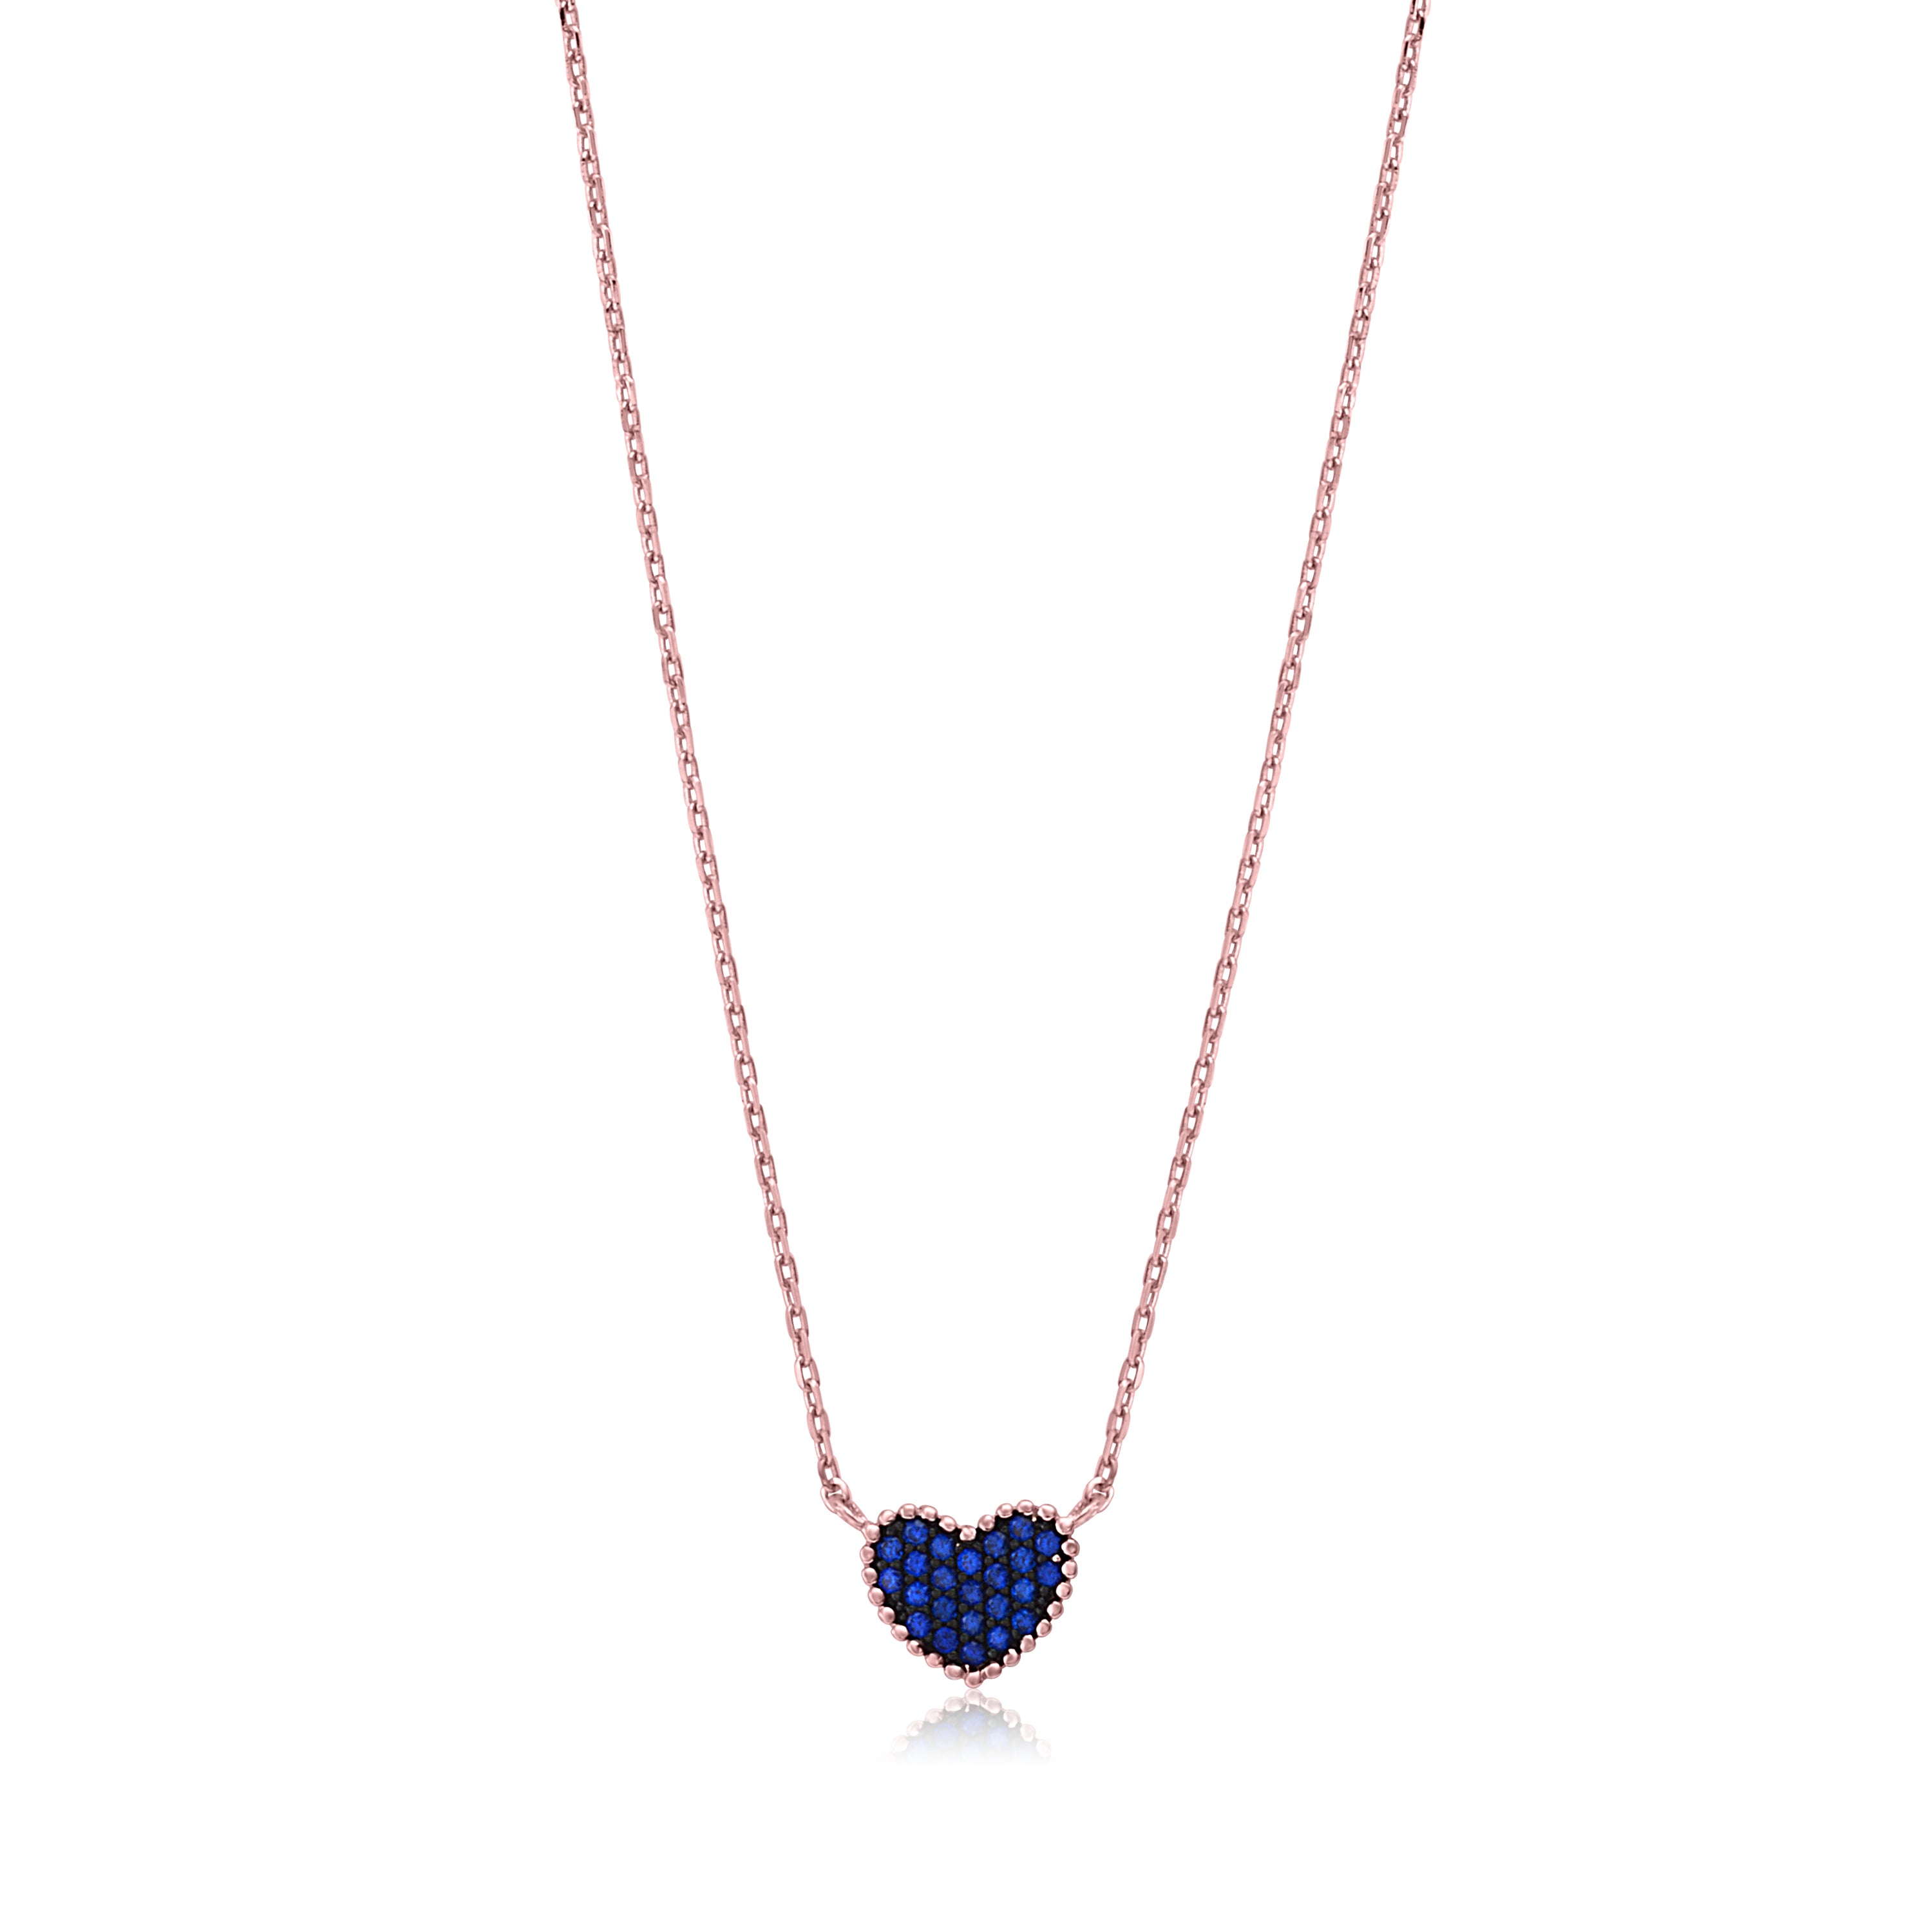 MASSETE Sterling Silver 925 Rose Gold Plated Heart Beaded Pave CZ Pendant Necklace Rolo Chain 17"